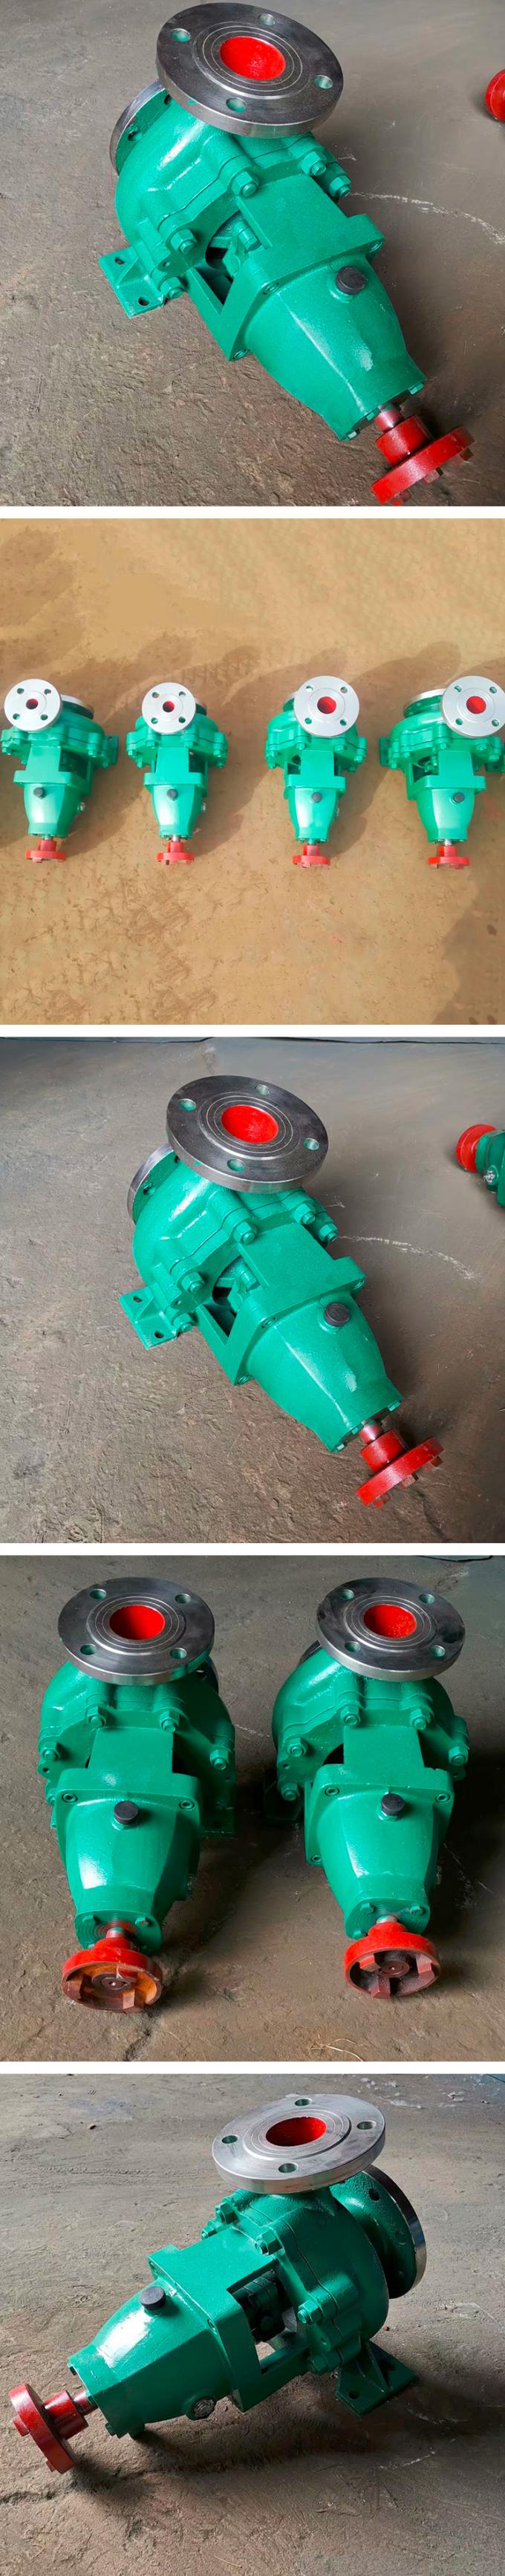 Single Stage Single Suction Chemical Transfer Pump IH Series With Closed Impeller